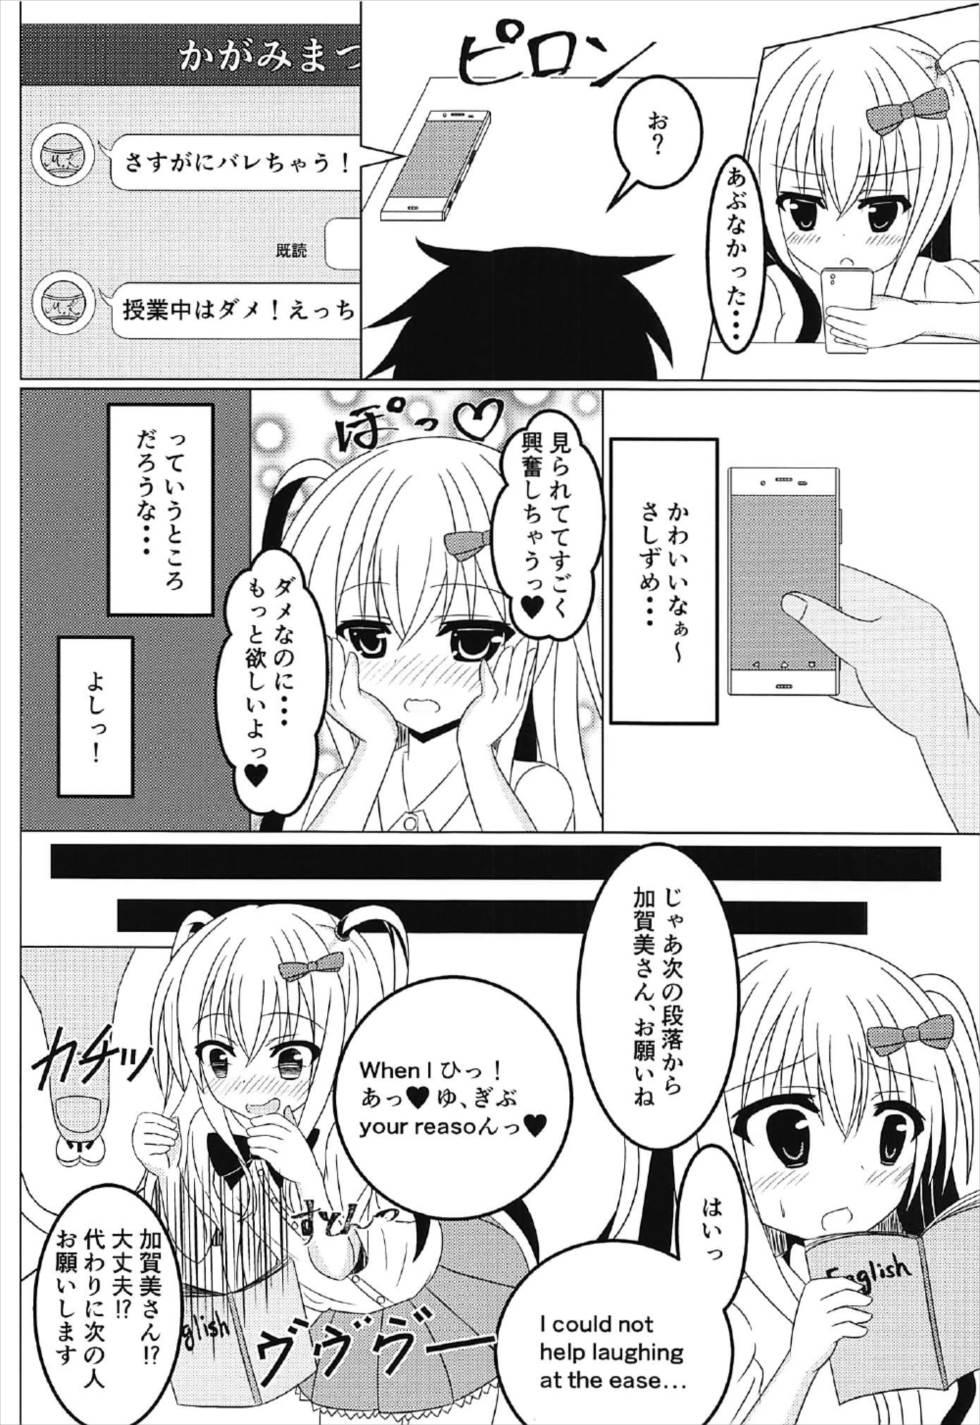 Trans 茉莉と授業を抜け出して - Girl friend beta Reverse Cowgirl - Page 5